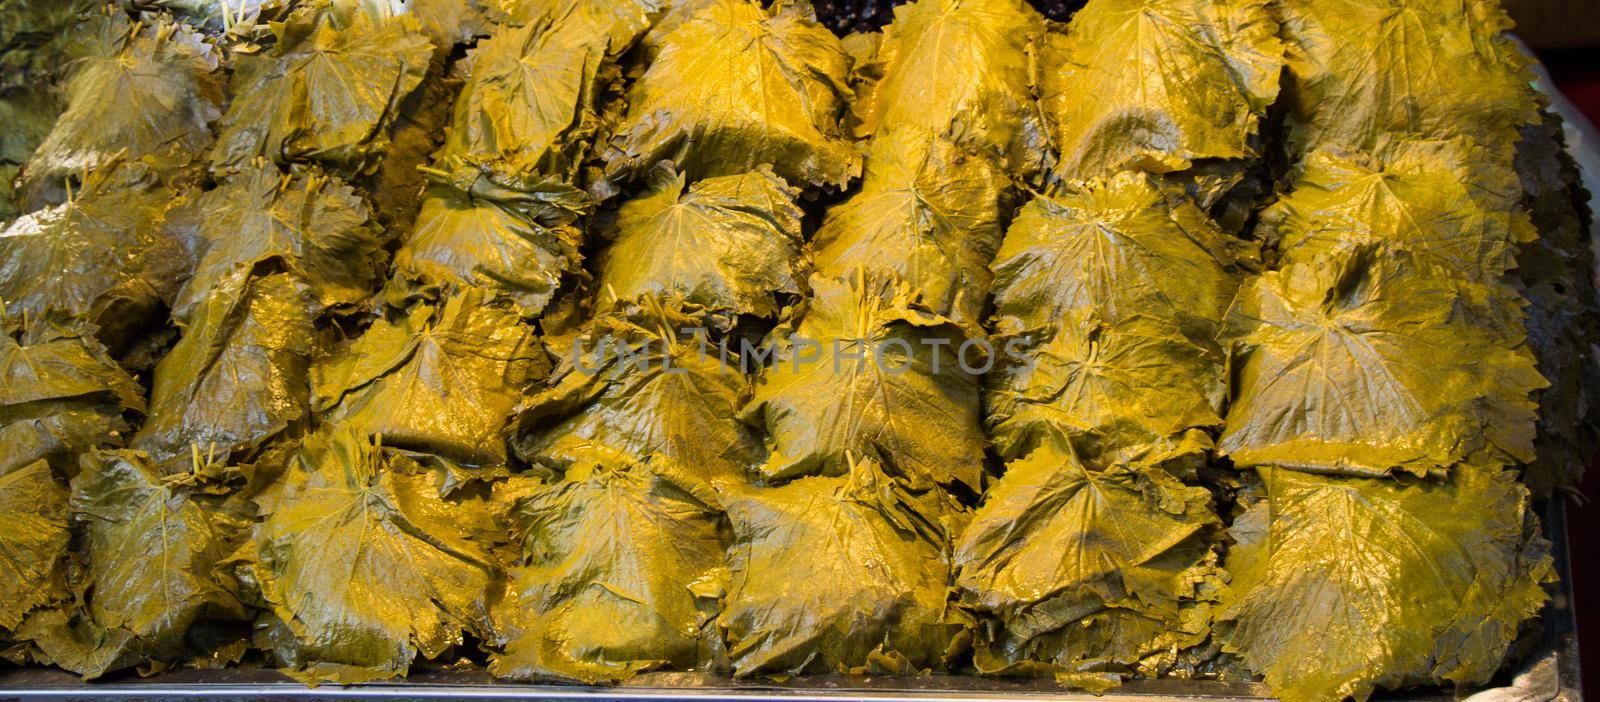 Grape vine leaves in a market as background for making vine leaves wrap by berkay